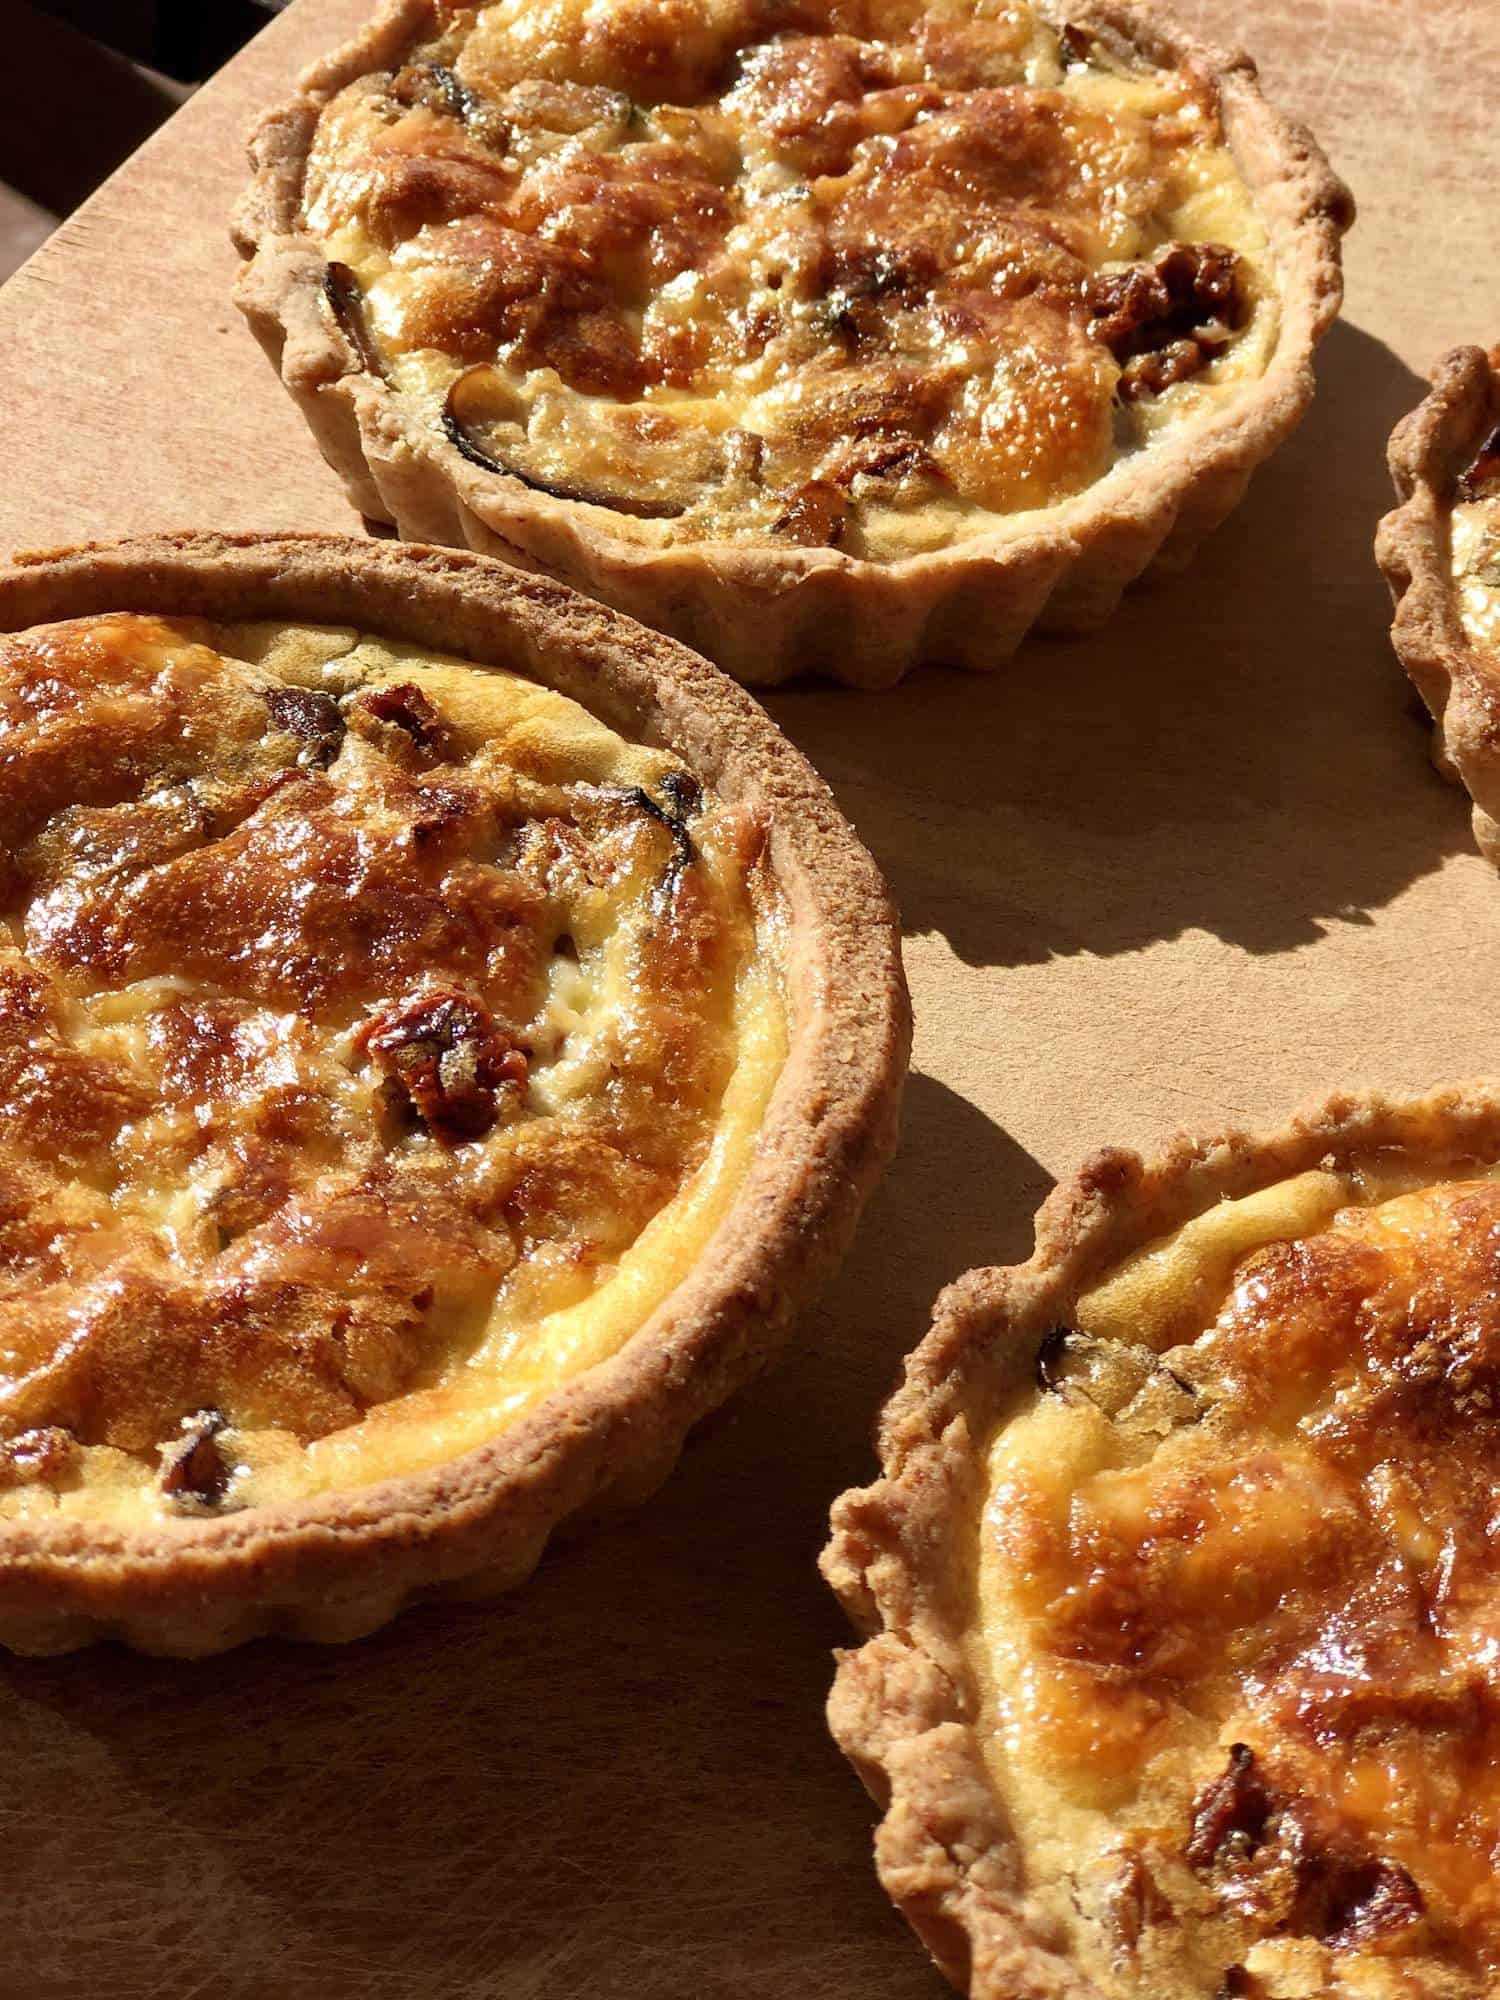 A pack of 3 mini-quiches made with spelt flour